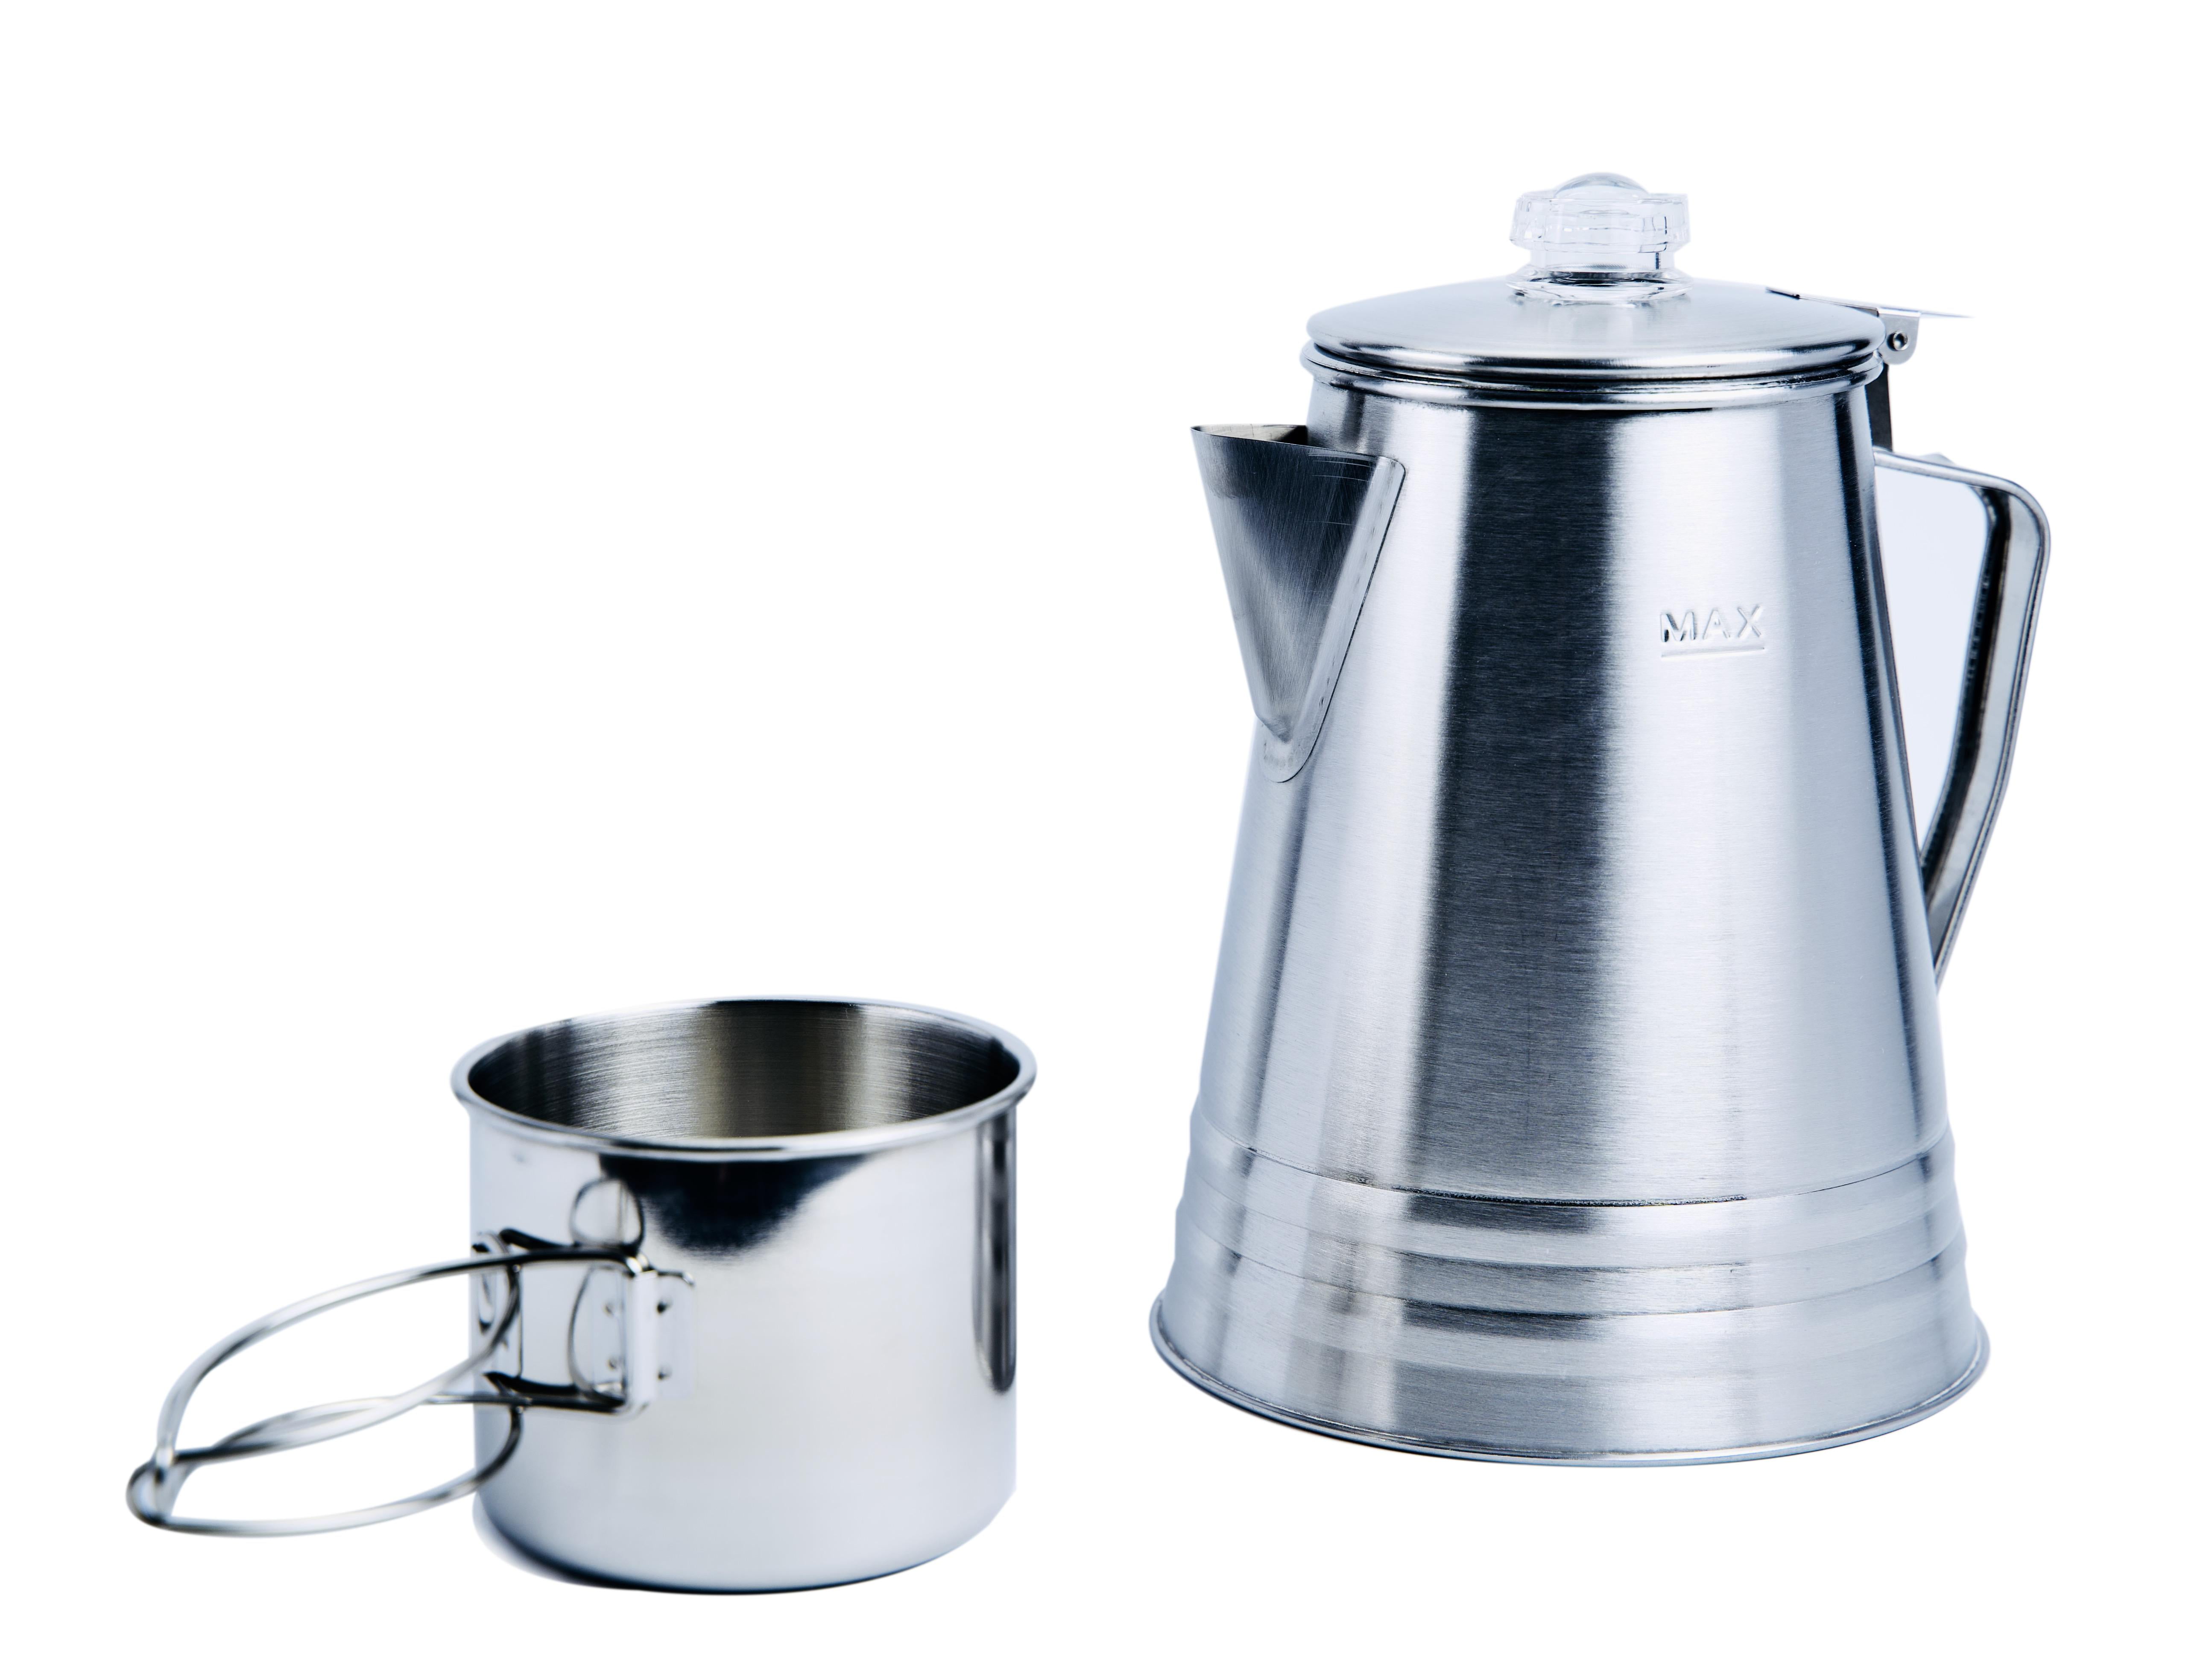 Ozark Trail 9 Cup Stainless Steel Percolator Coffee Maker Camping